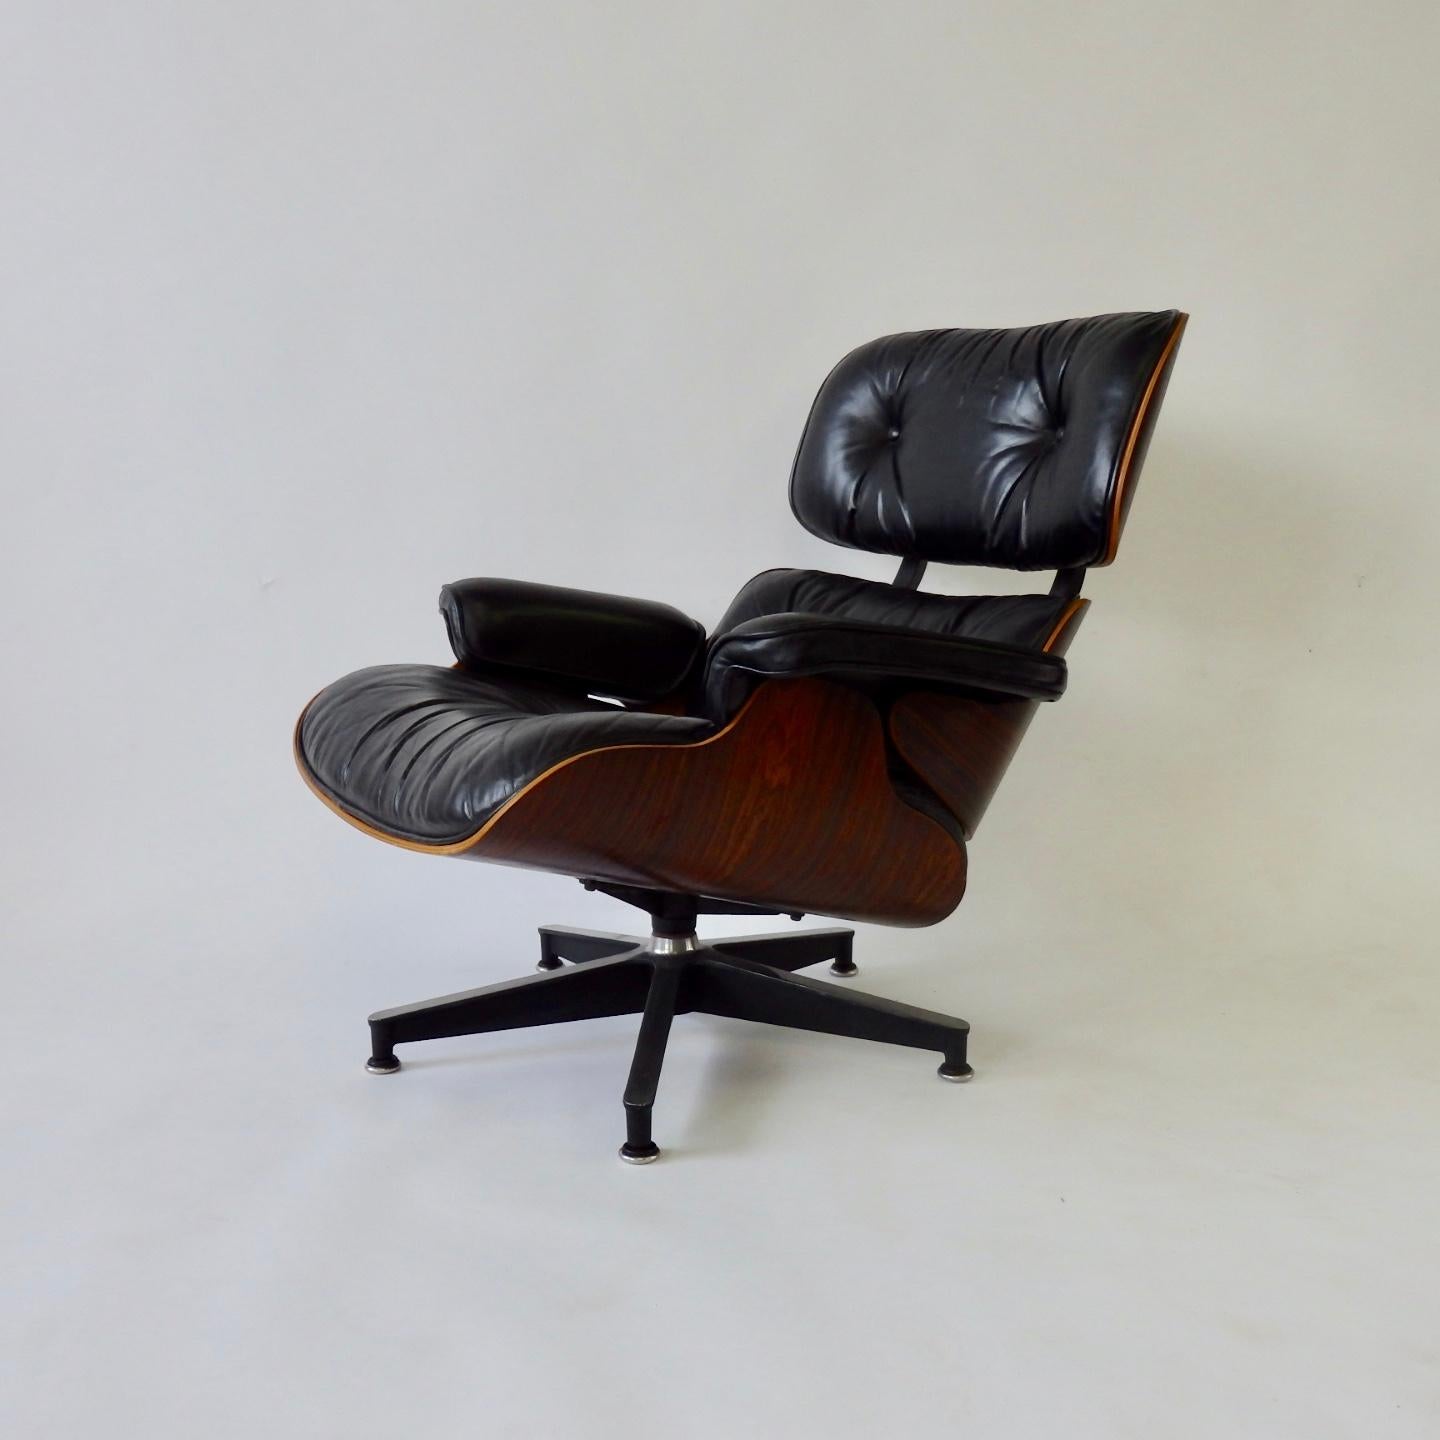 20th Century One Owner Estate Charles and Ray Eames Black Leather Lounge Chair with Ottoman